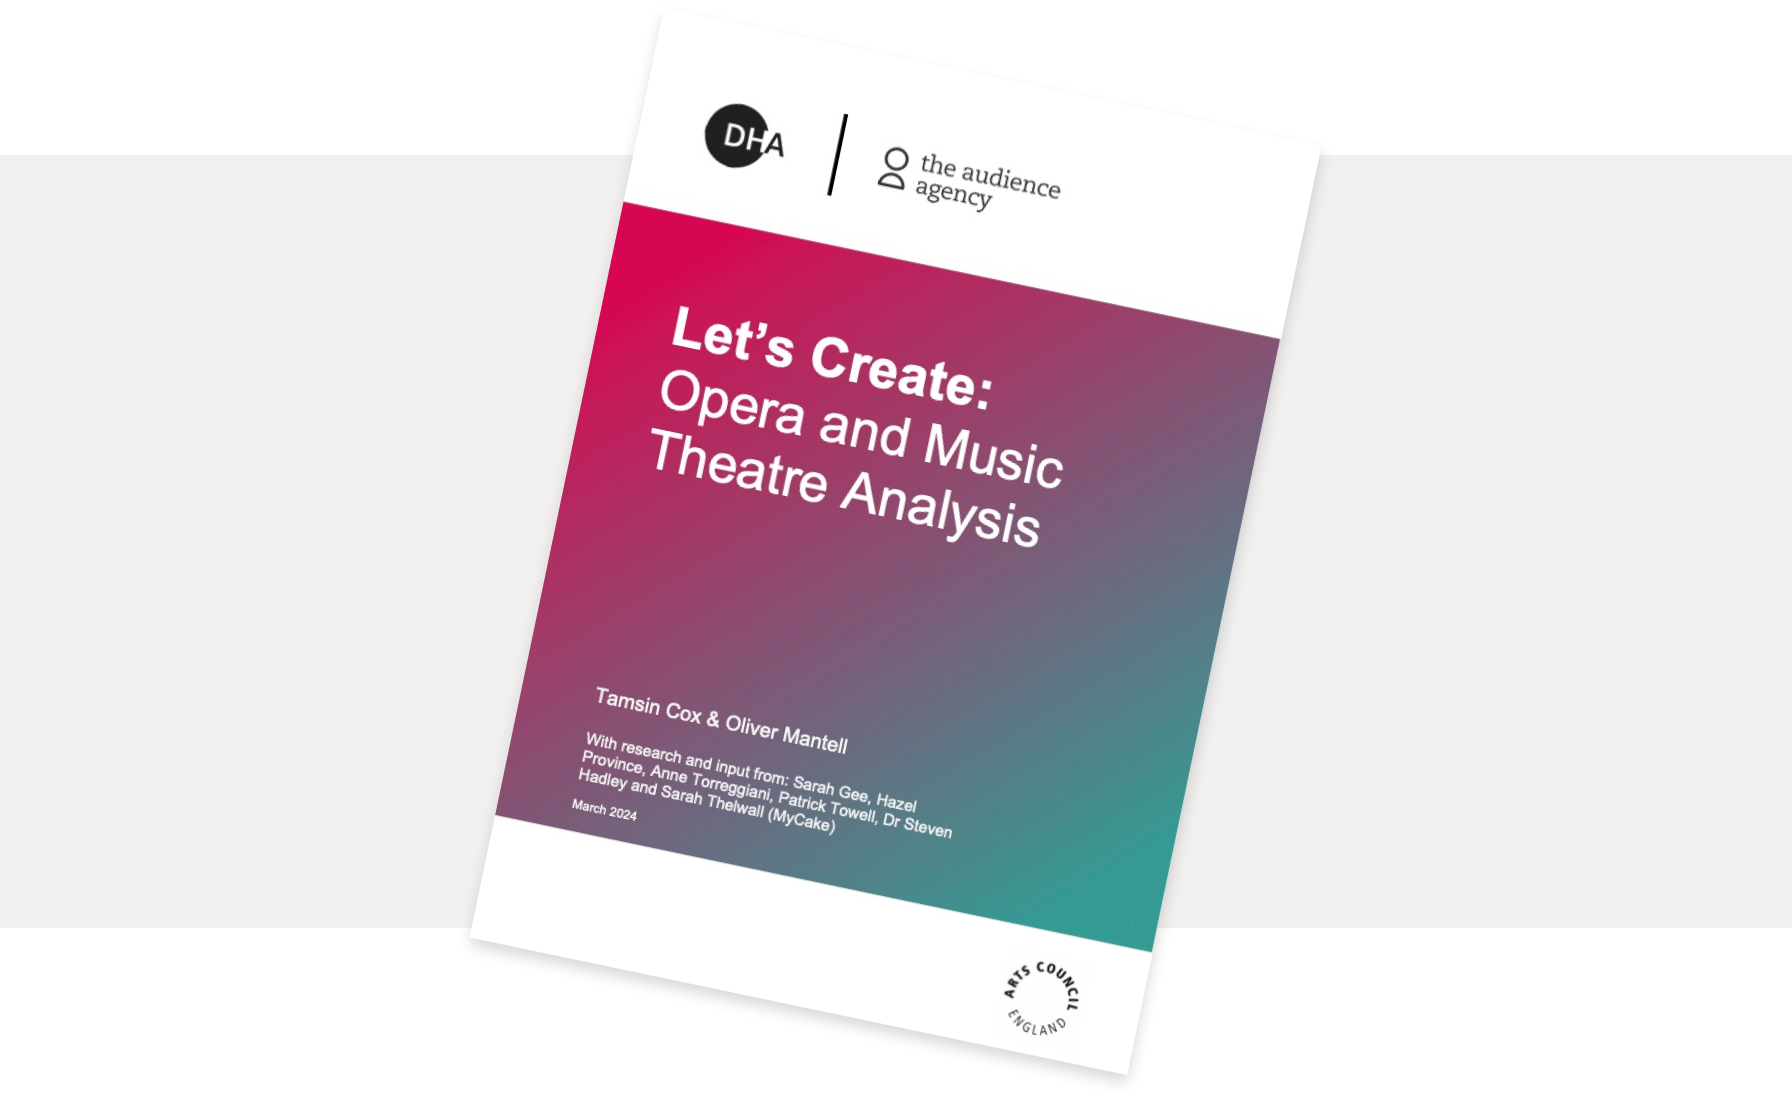 Let’s Create: Opera and Music Theatre Analysis report front cover, with the title and Tamsin Cox & Oliver Mantell With research and input from: Sarah Gee, Hazel Province, Anne Torreggiani, Patrick Towell, Dr Steven Hadley and Sarah Thelwall (MyCake) March 2024 over a gradient background with The Audience Agency, DHA and Arts Council England logos